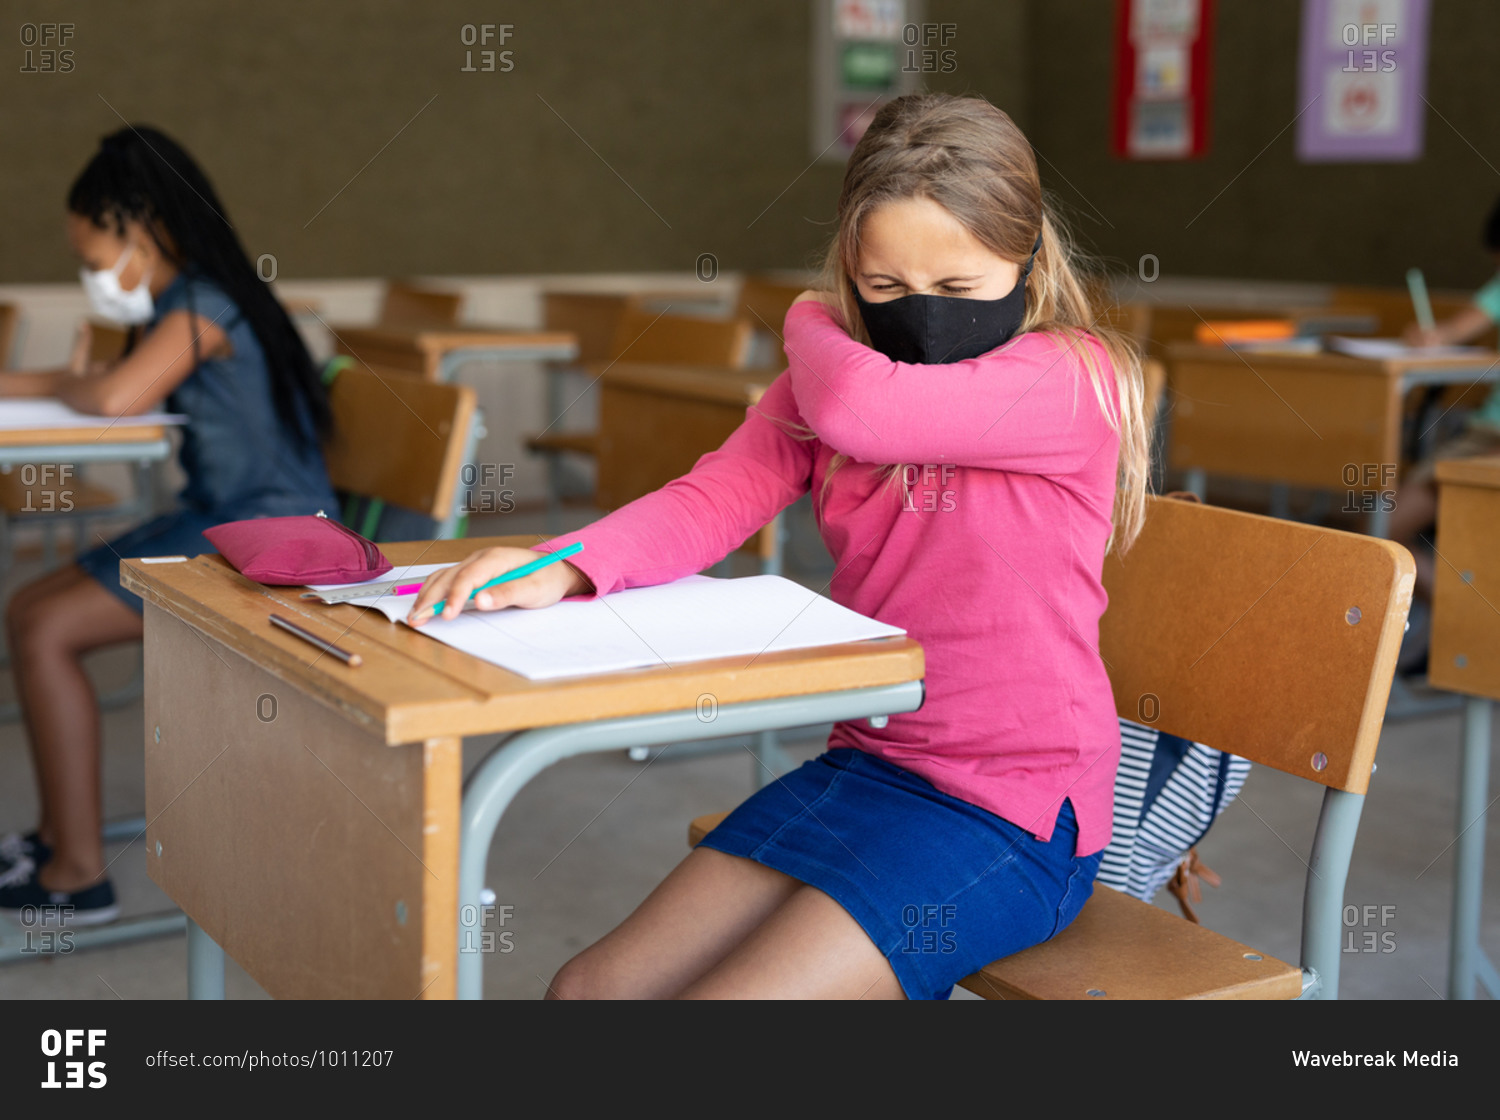 Caucasian girl sitting at desk wearing face mask in classroom, covering her face while sneezing. Primary education social distancing health safety during Covid19 Coronavirus pandemic.